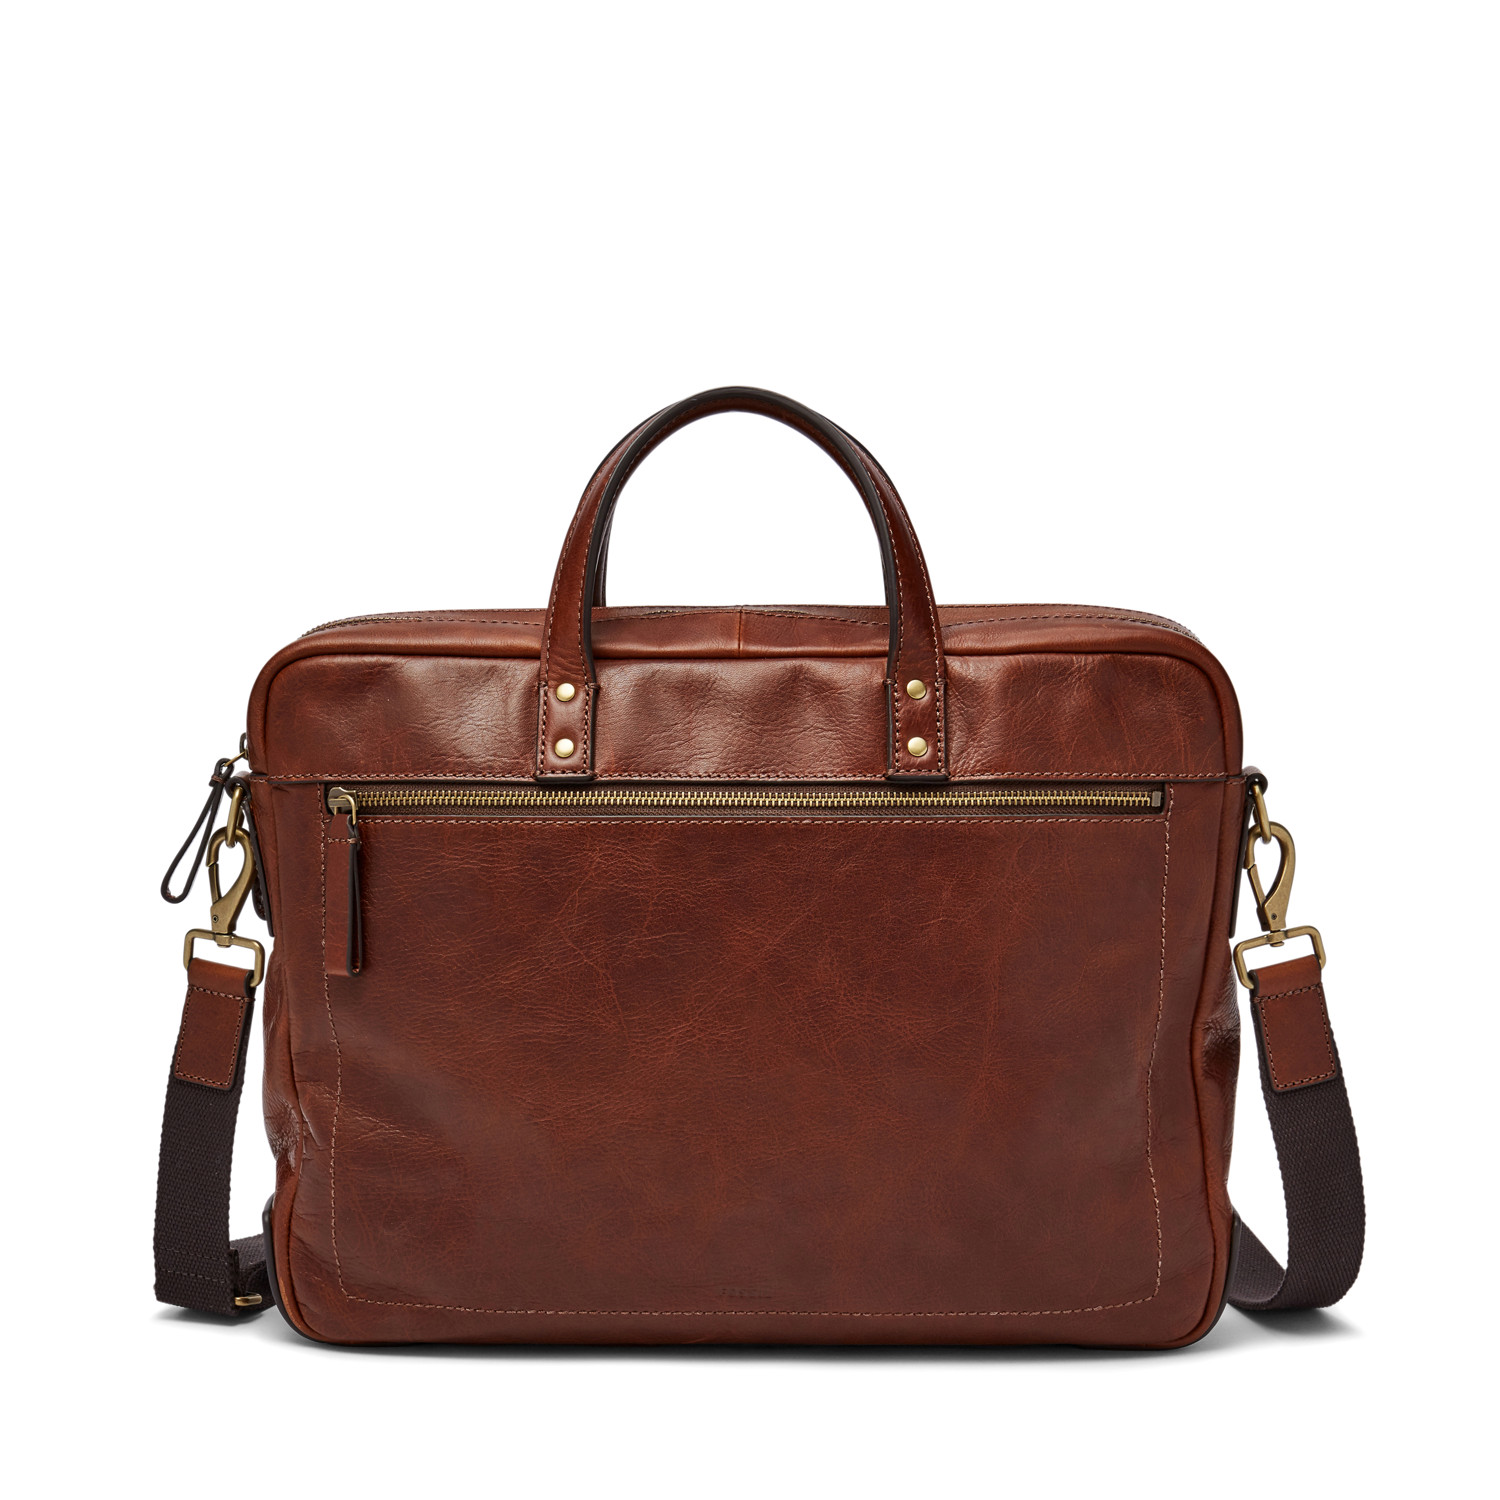 Haskell Double Zip Briefcase - Fossil